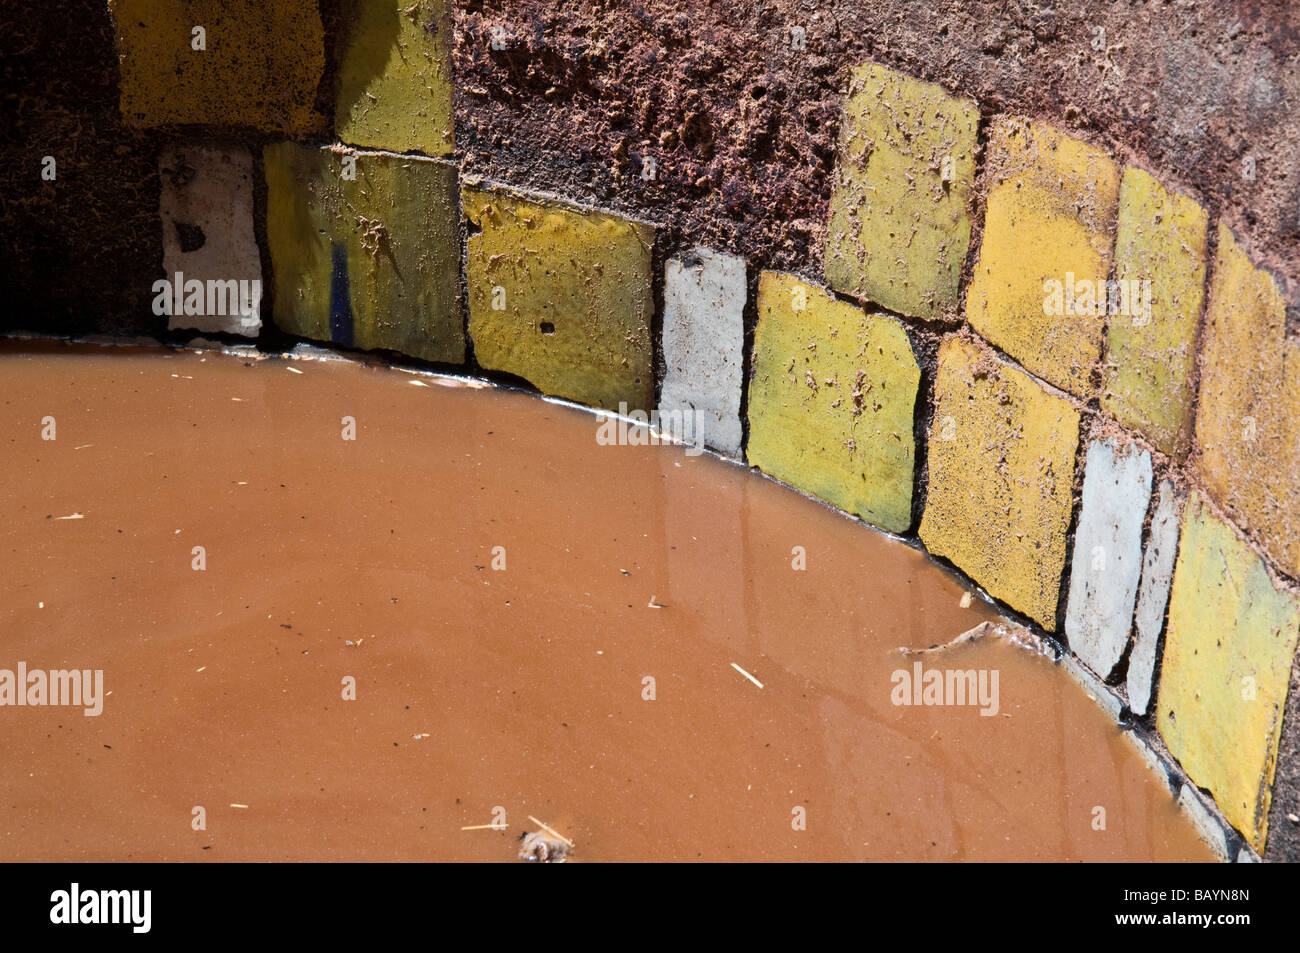 Tiled vat of yellow dye at the Chouara tannery in the medina. The bright yellow colour is produced from saffron. Stock Photo